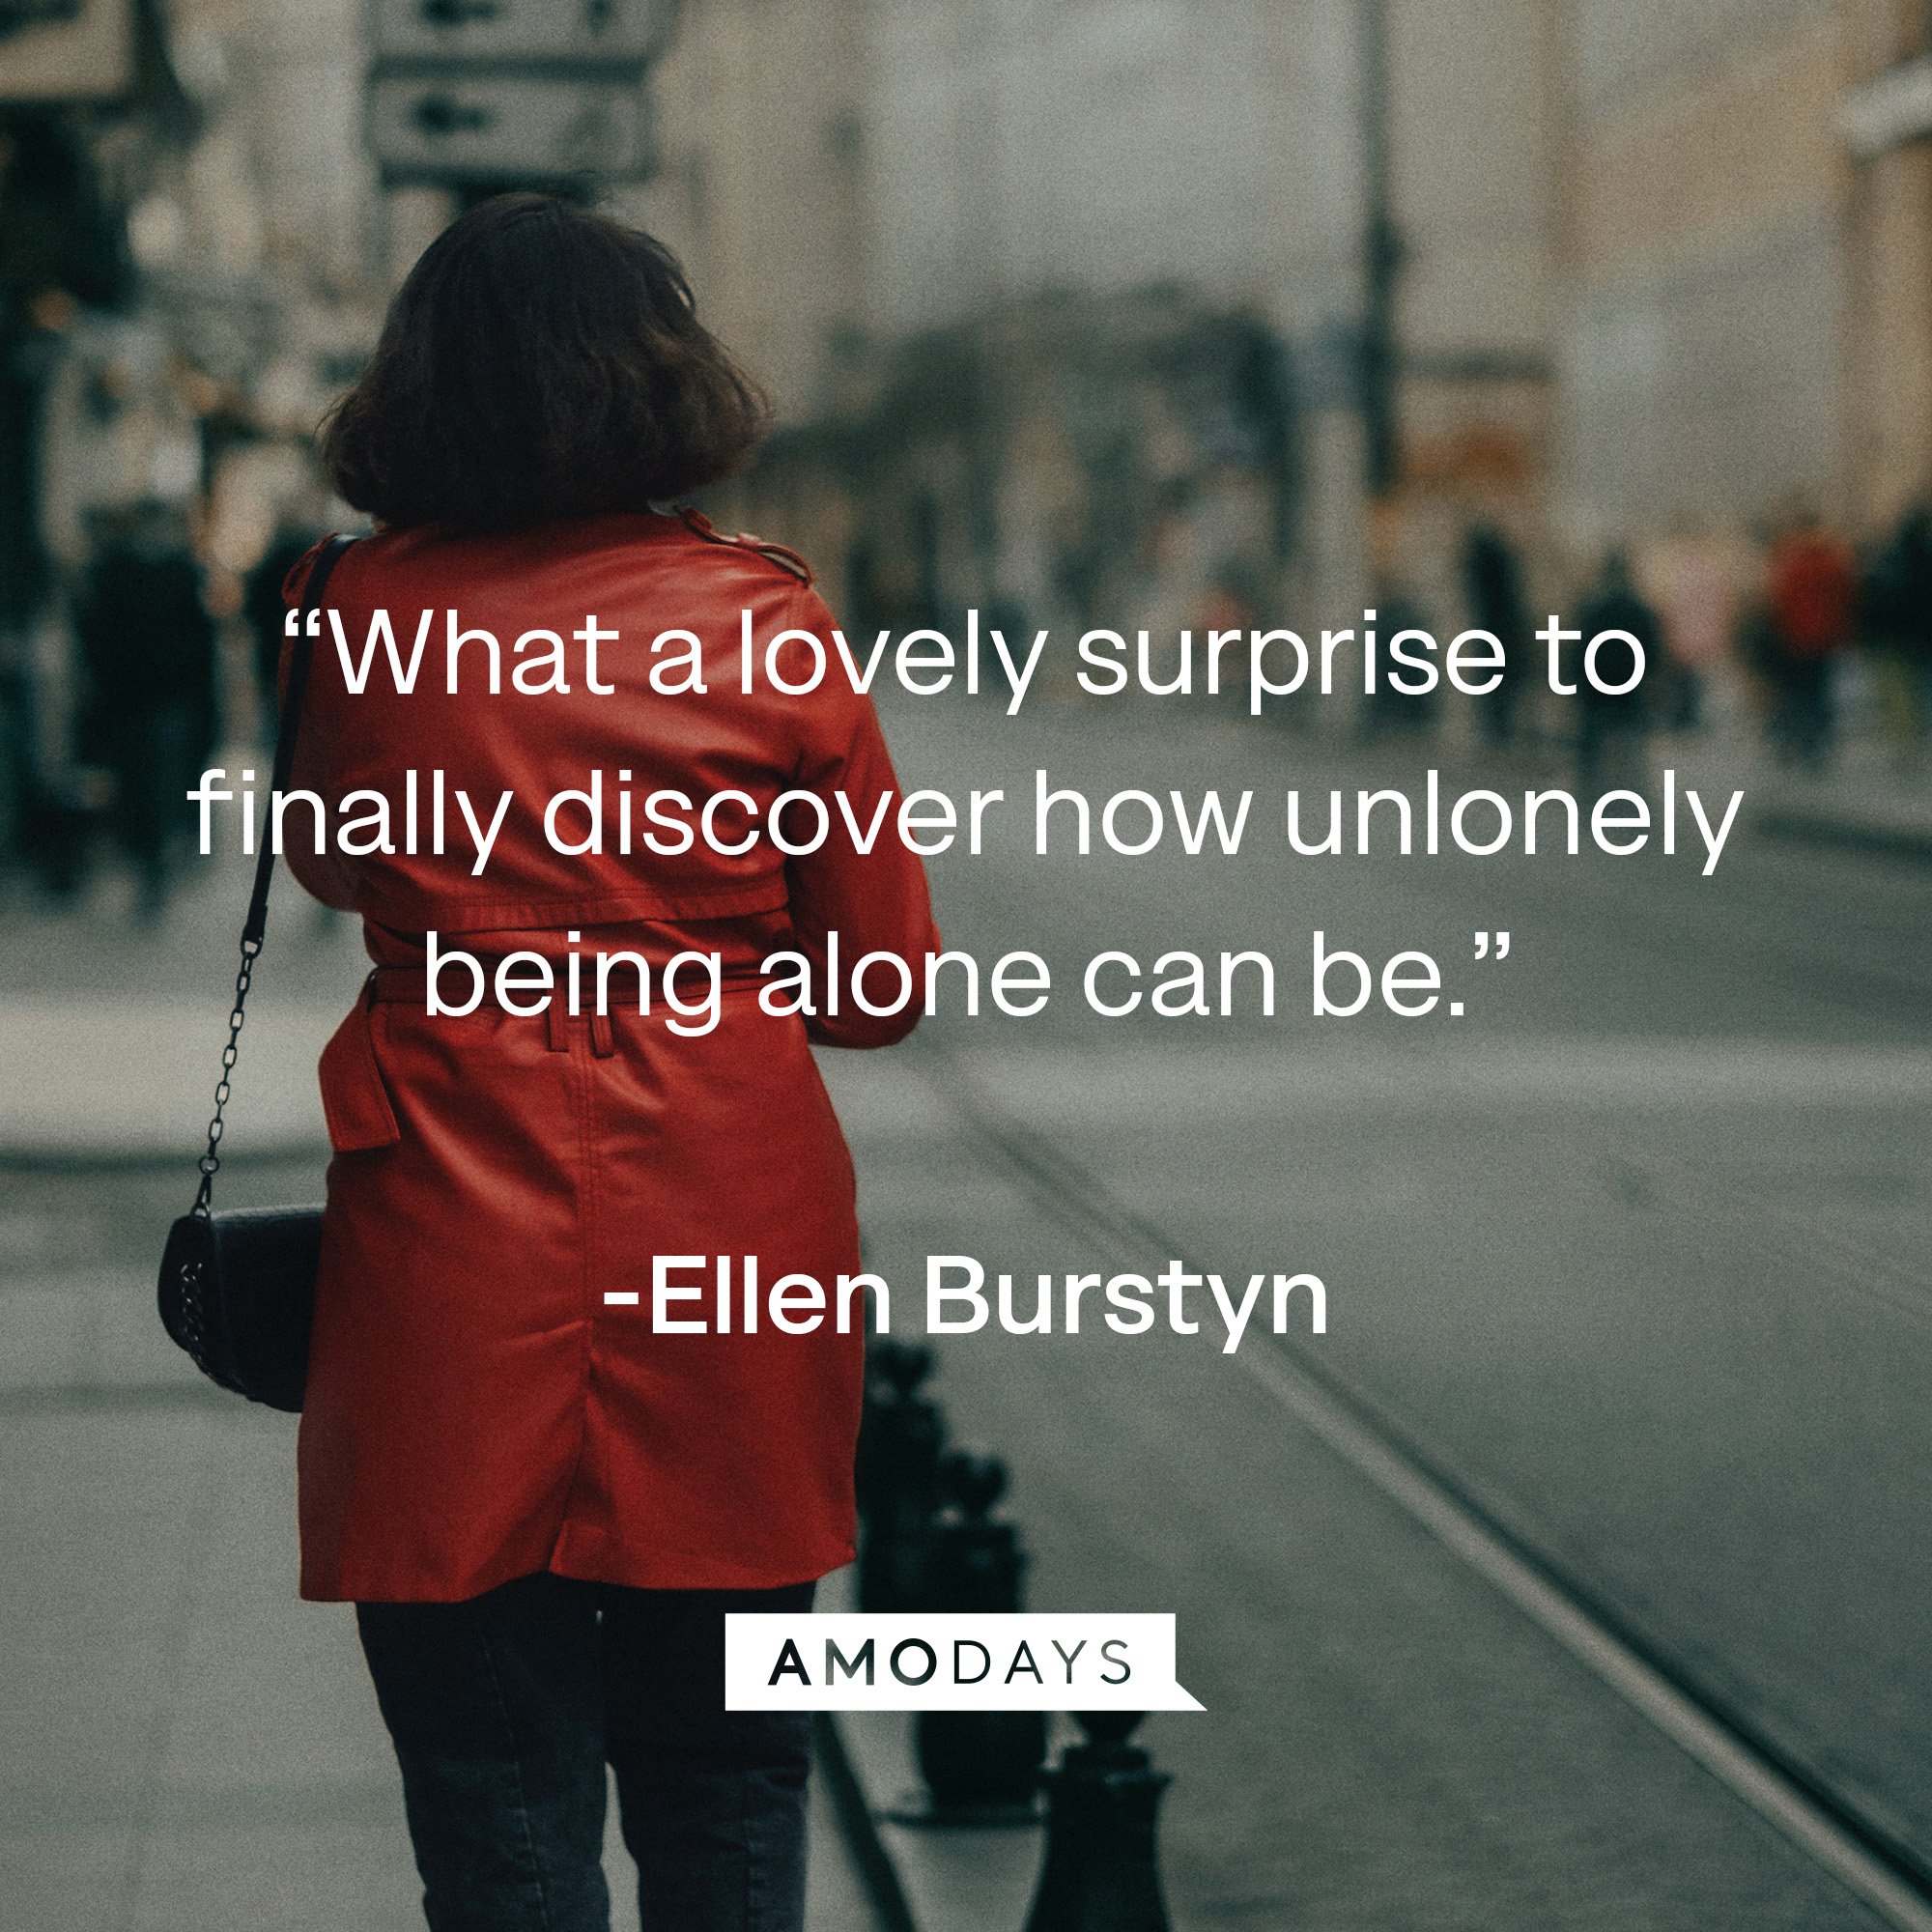 Ellen Burstyn’s quote: “What a lovely surprise to finally discover how unlonely being alone can be.” | Image: Amodays